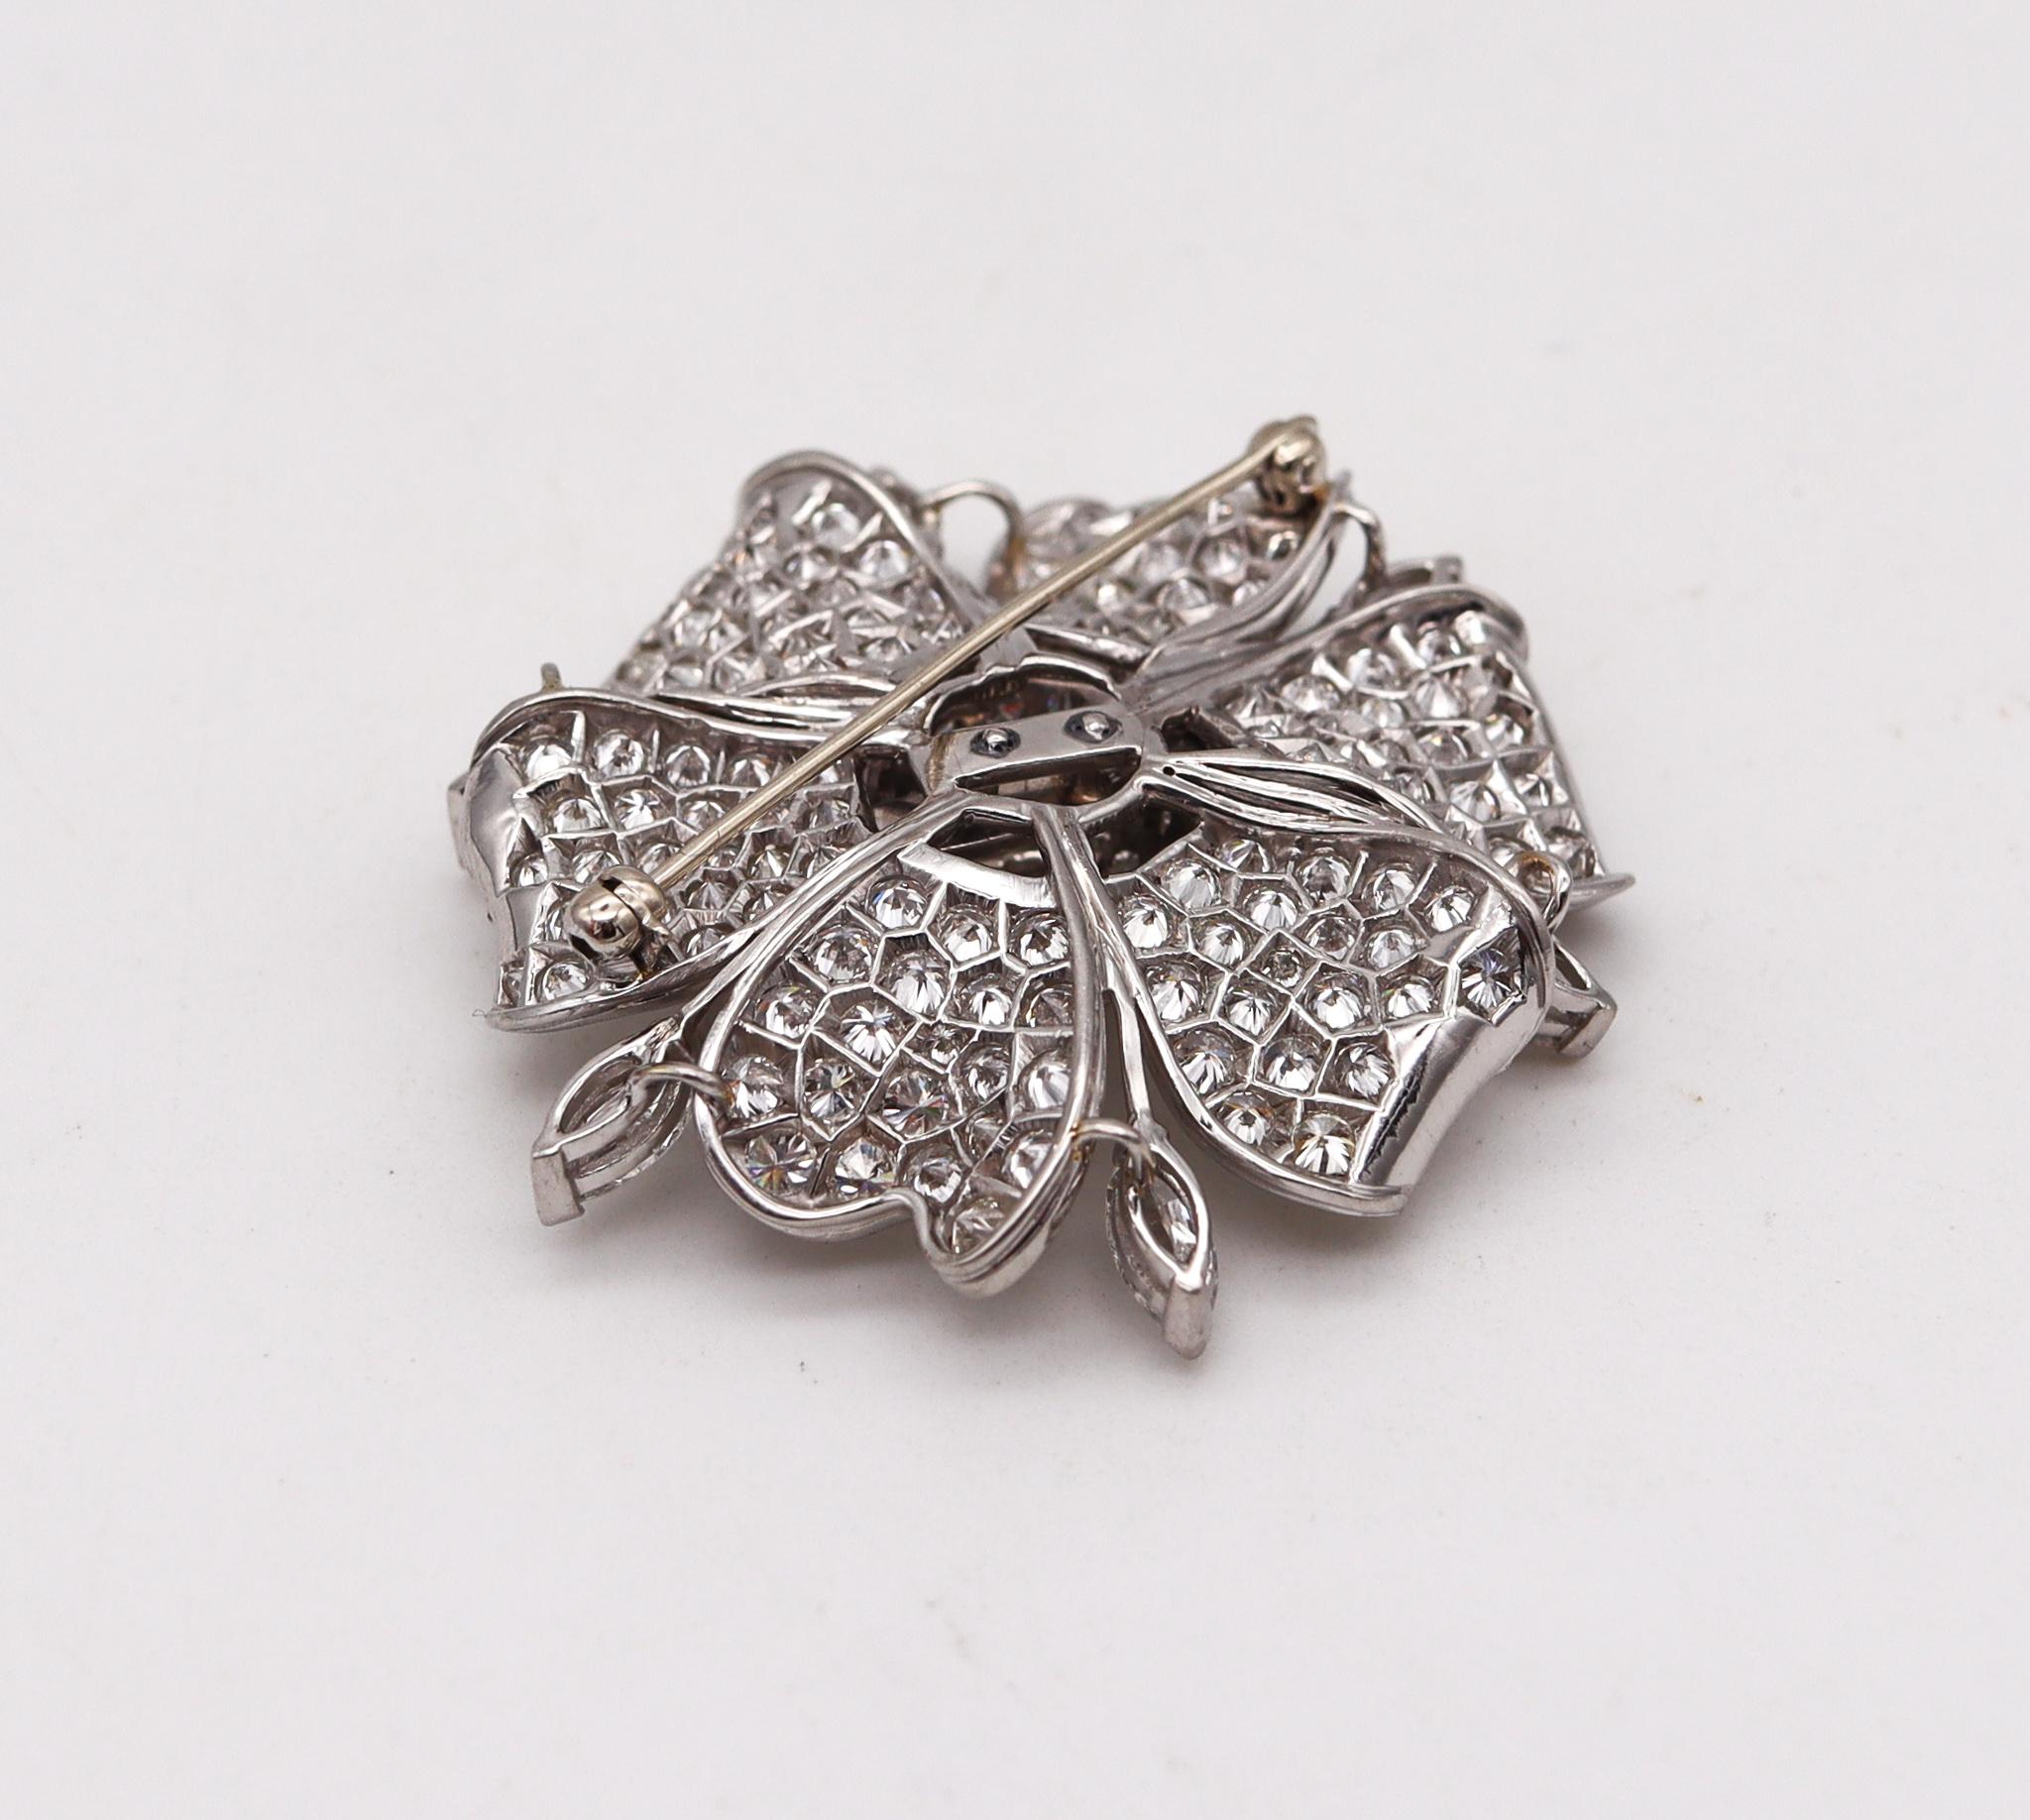 Brilliant Cut Art Deco 1930 Classic Brooch in Platinum with Pave of 13.02 Cts in VVS Diamonds